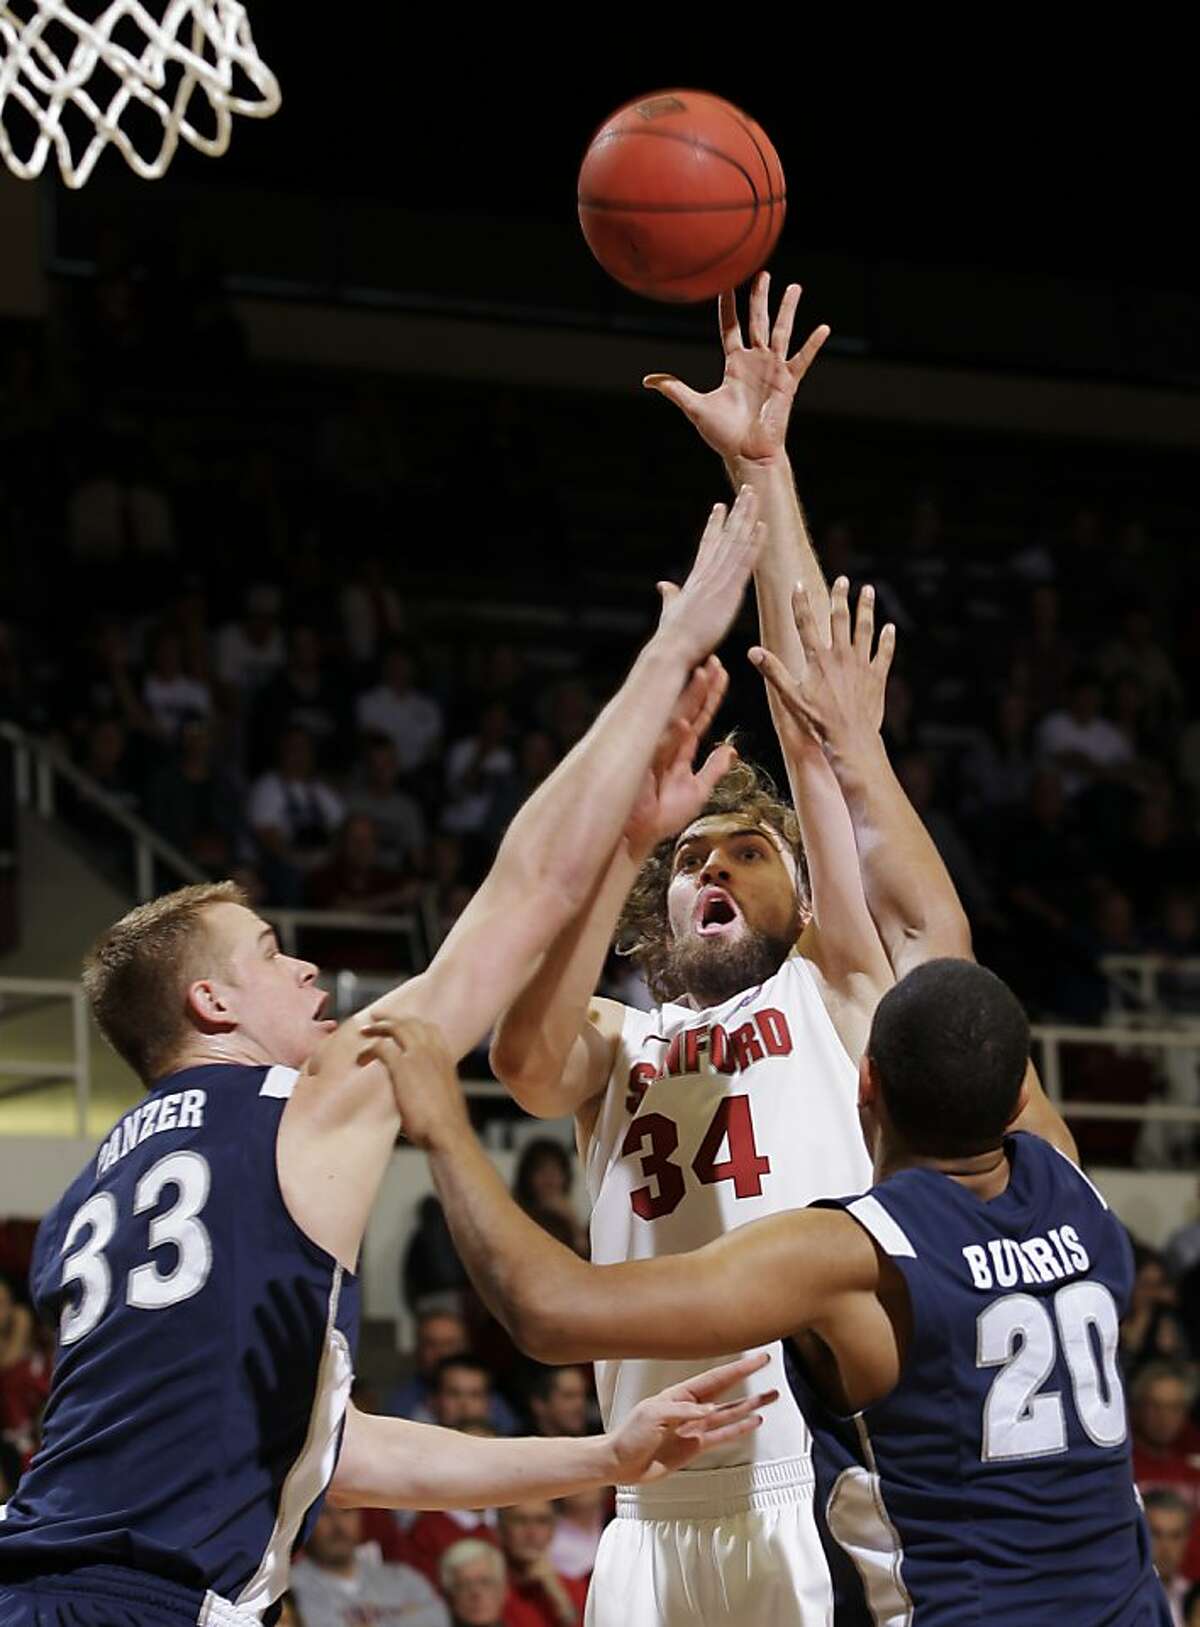 Stanford forward Andrew Zimmermann (34) scores in front of Nevada forward Kevin Panzer (33) and guard Jordan Burris (20) in the first half of a college basketball game in the NIT quarterfinals, Wednesday, March 21, 2012, in Stanford, Calif.